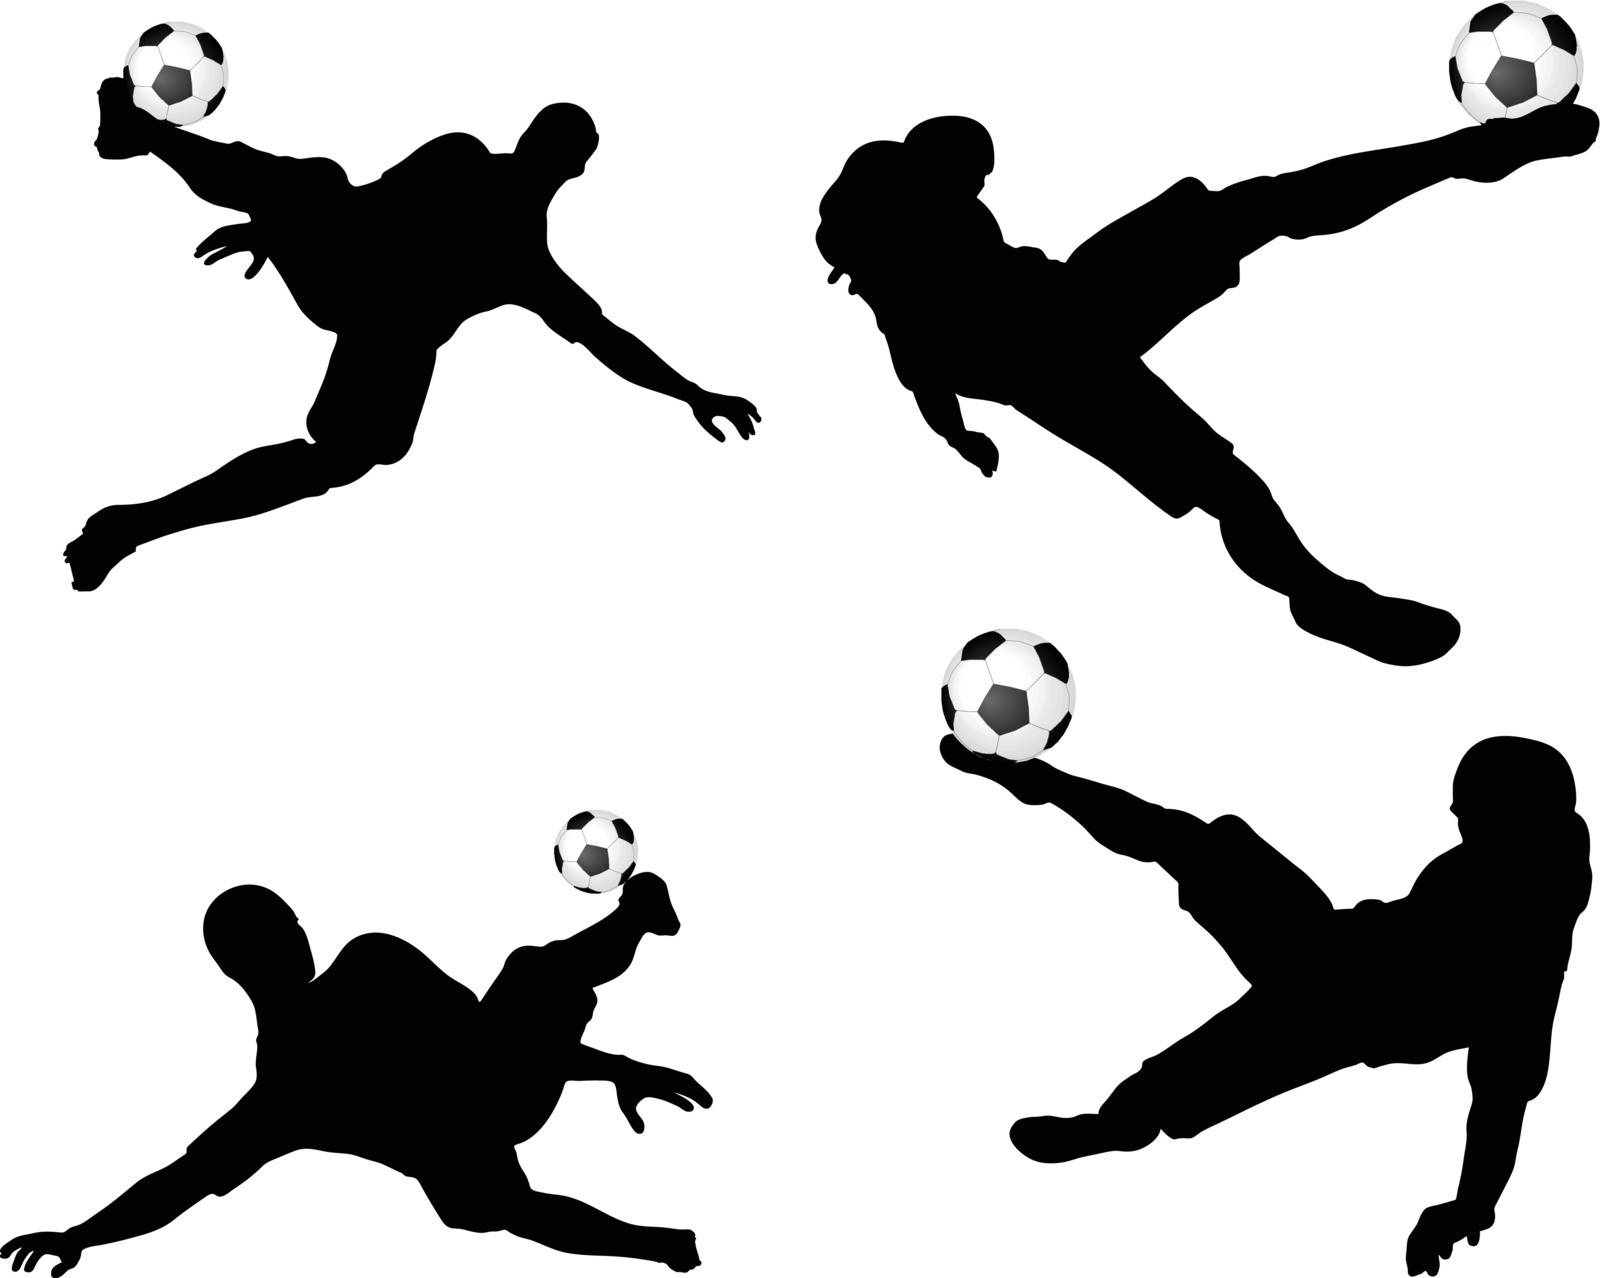 isolated poses of soccer players silhouettes in air position